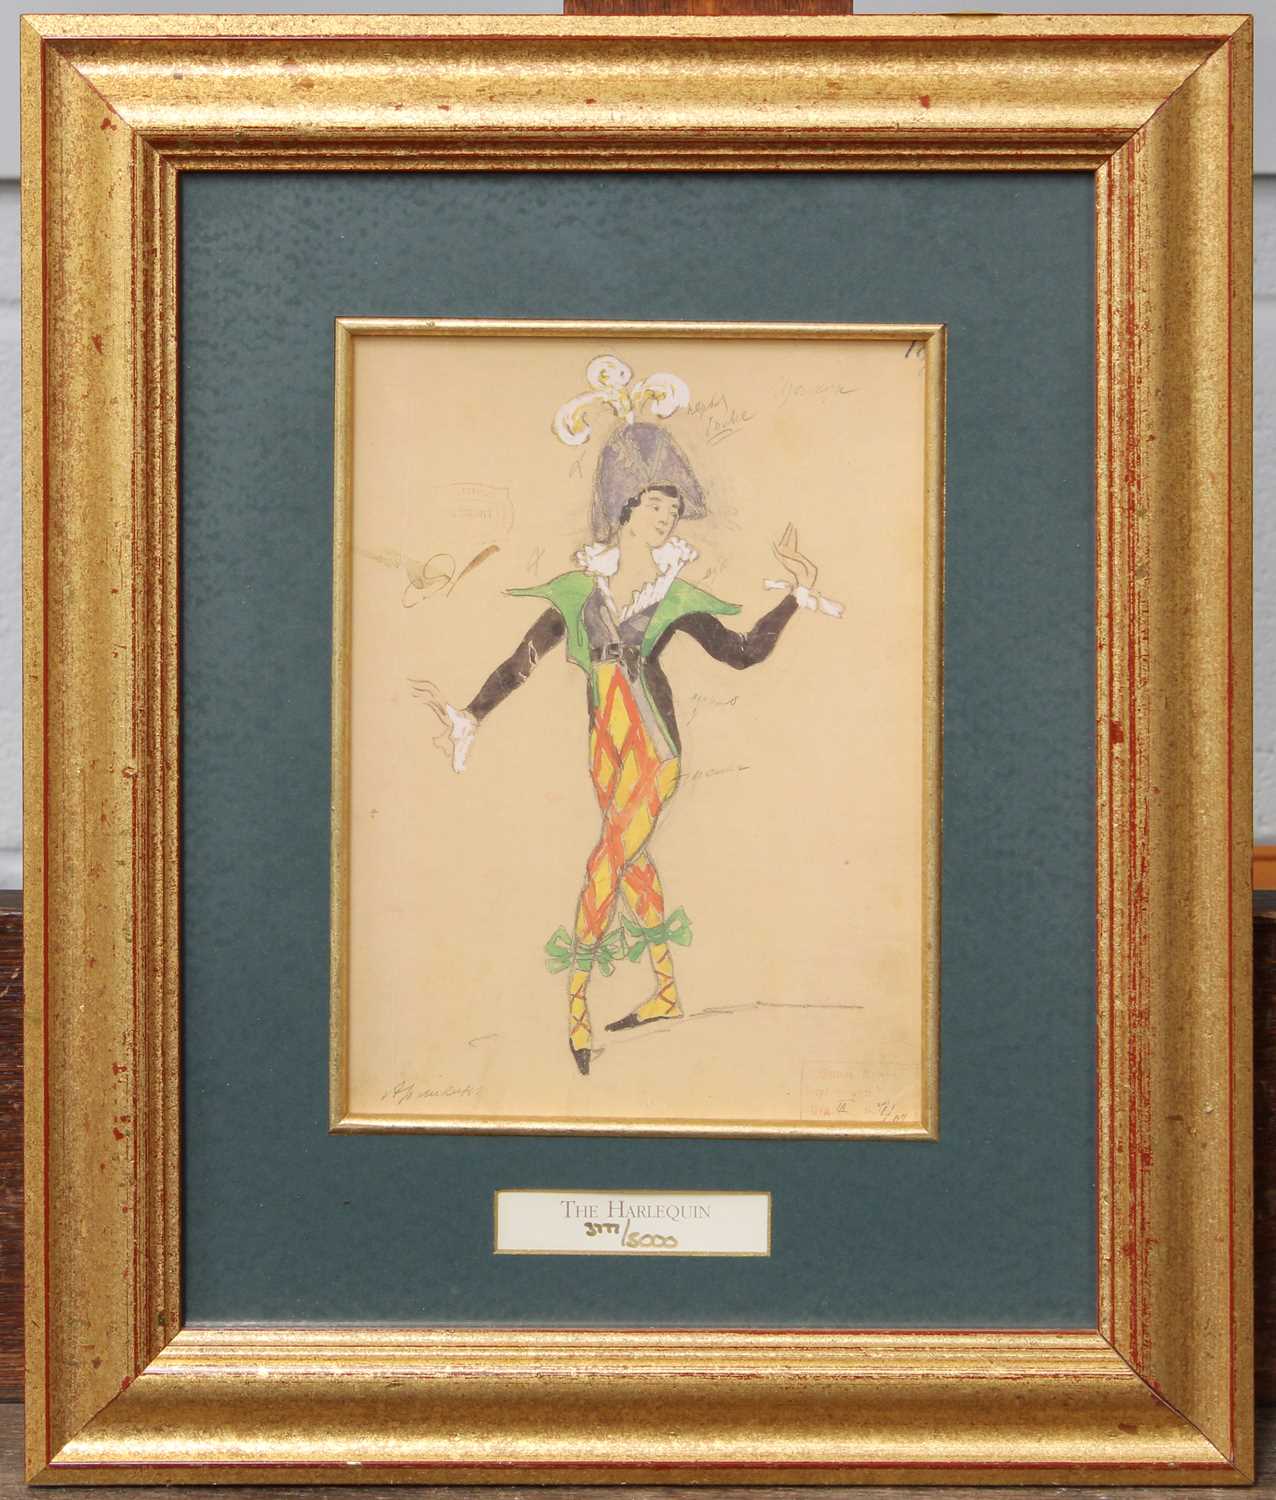 Russian School (20th Century) "The Harlequin" from The Original Designs of the Bolshoi Nutcracker, - Image 3 of 3